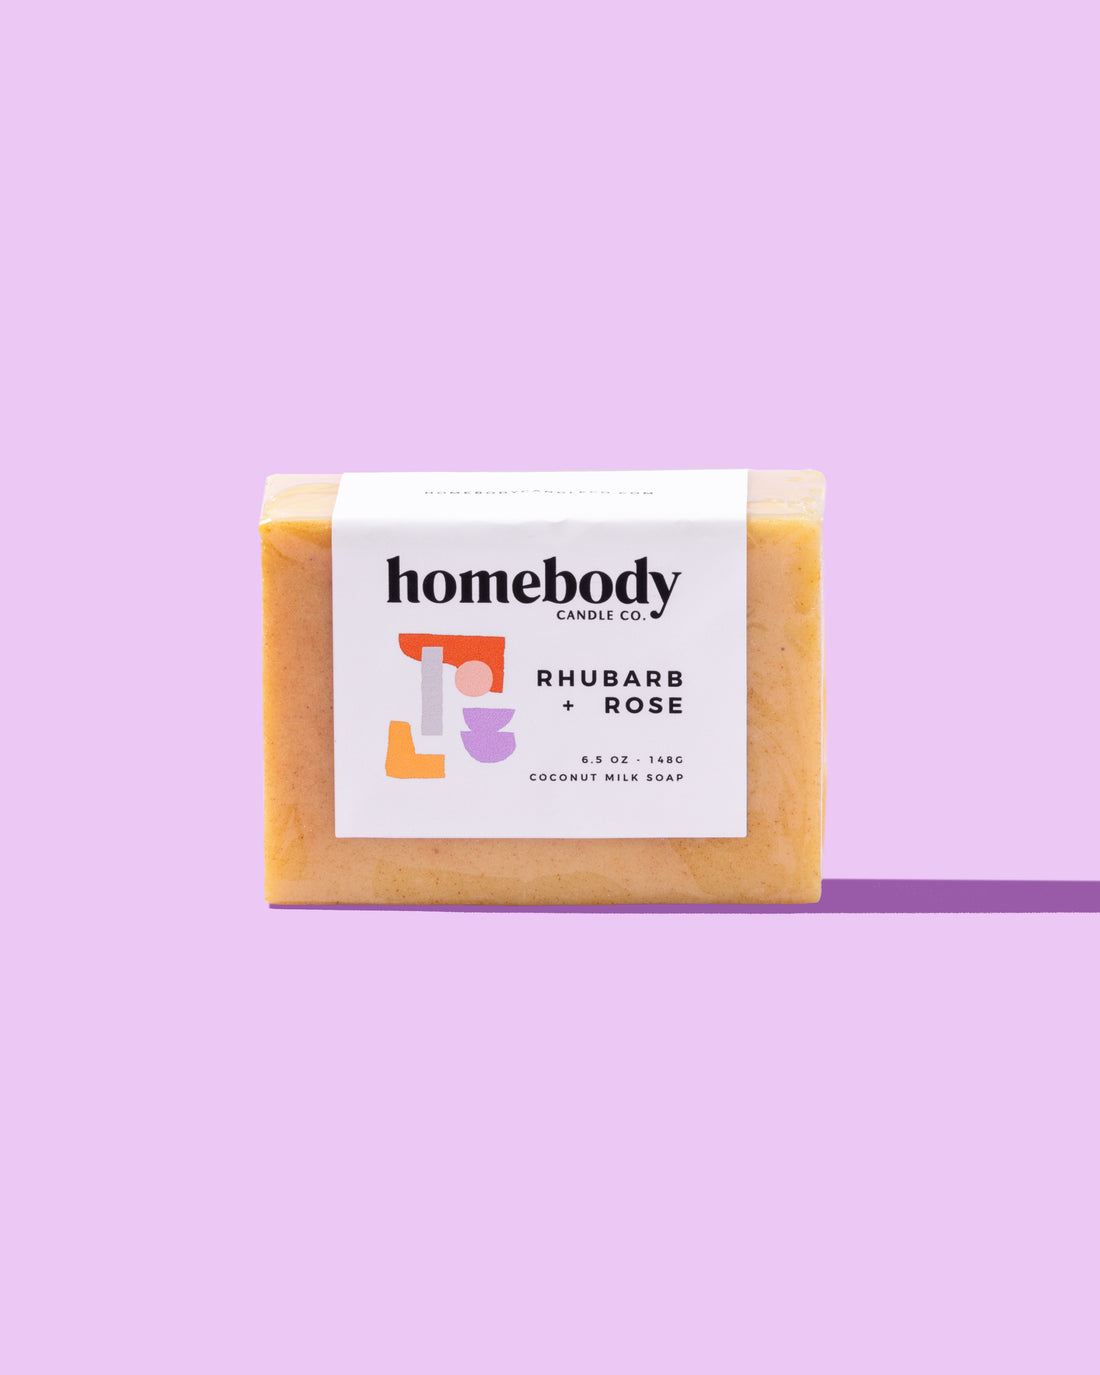 Rhubarb + Rose milk soap Homebody Candle Co